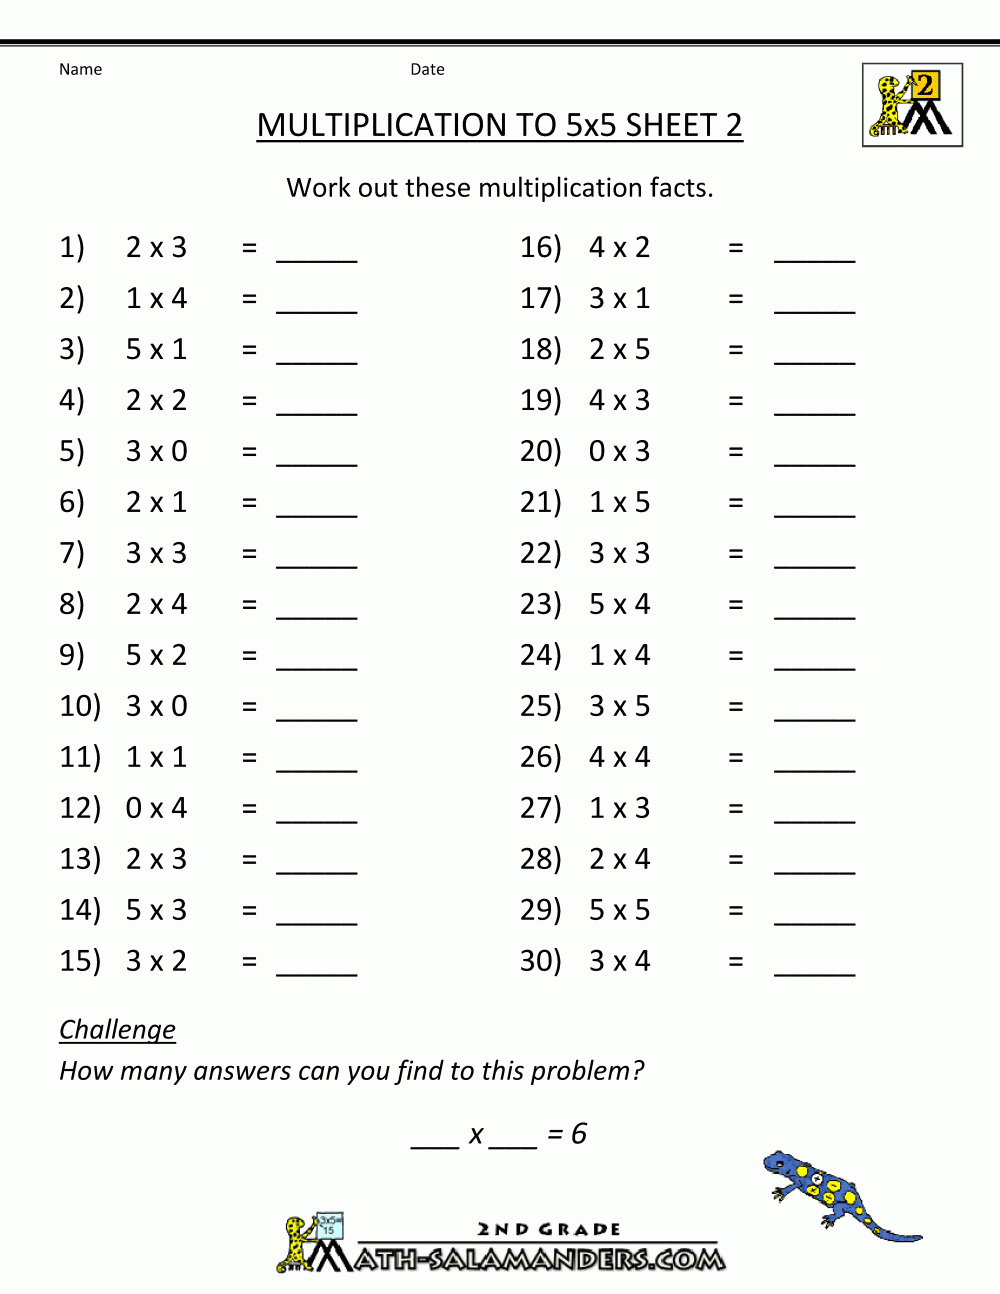 Multiplication Practice Worksheets To 5X5 intended for Free Printable Multiplication Problems